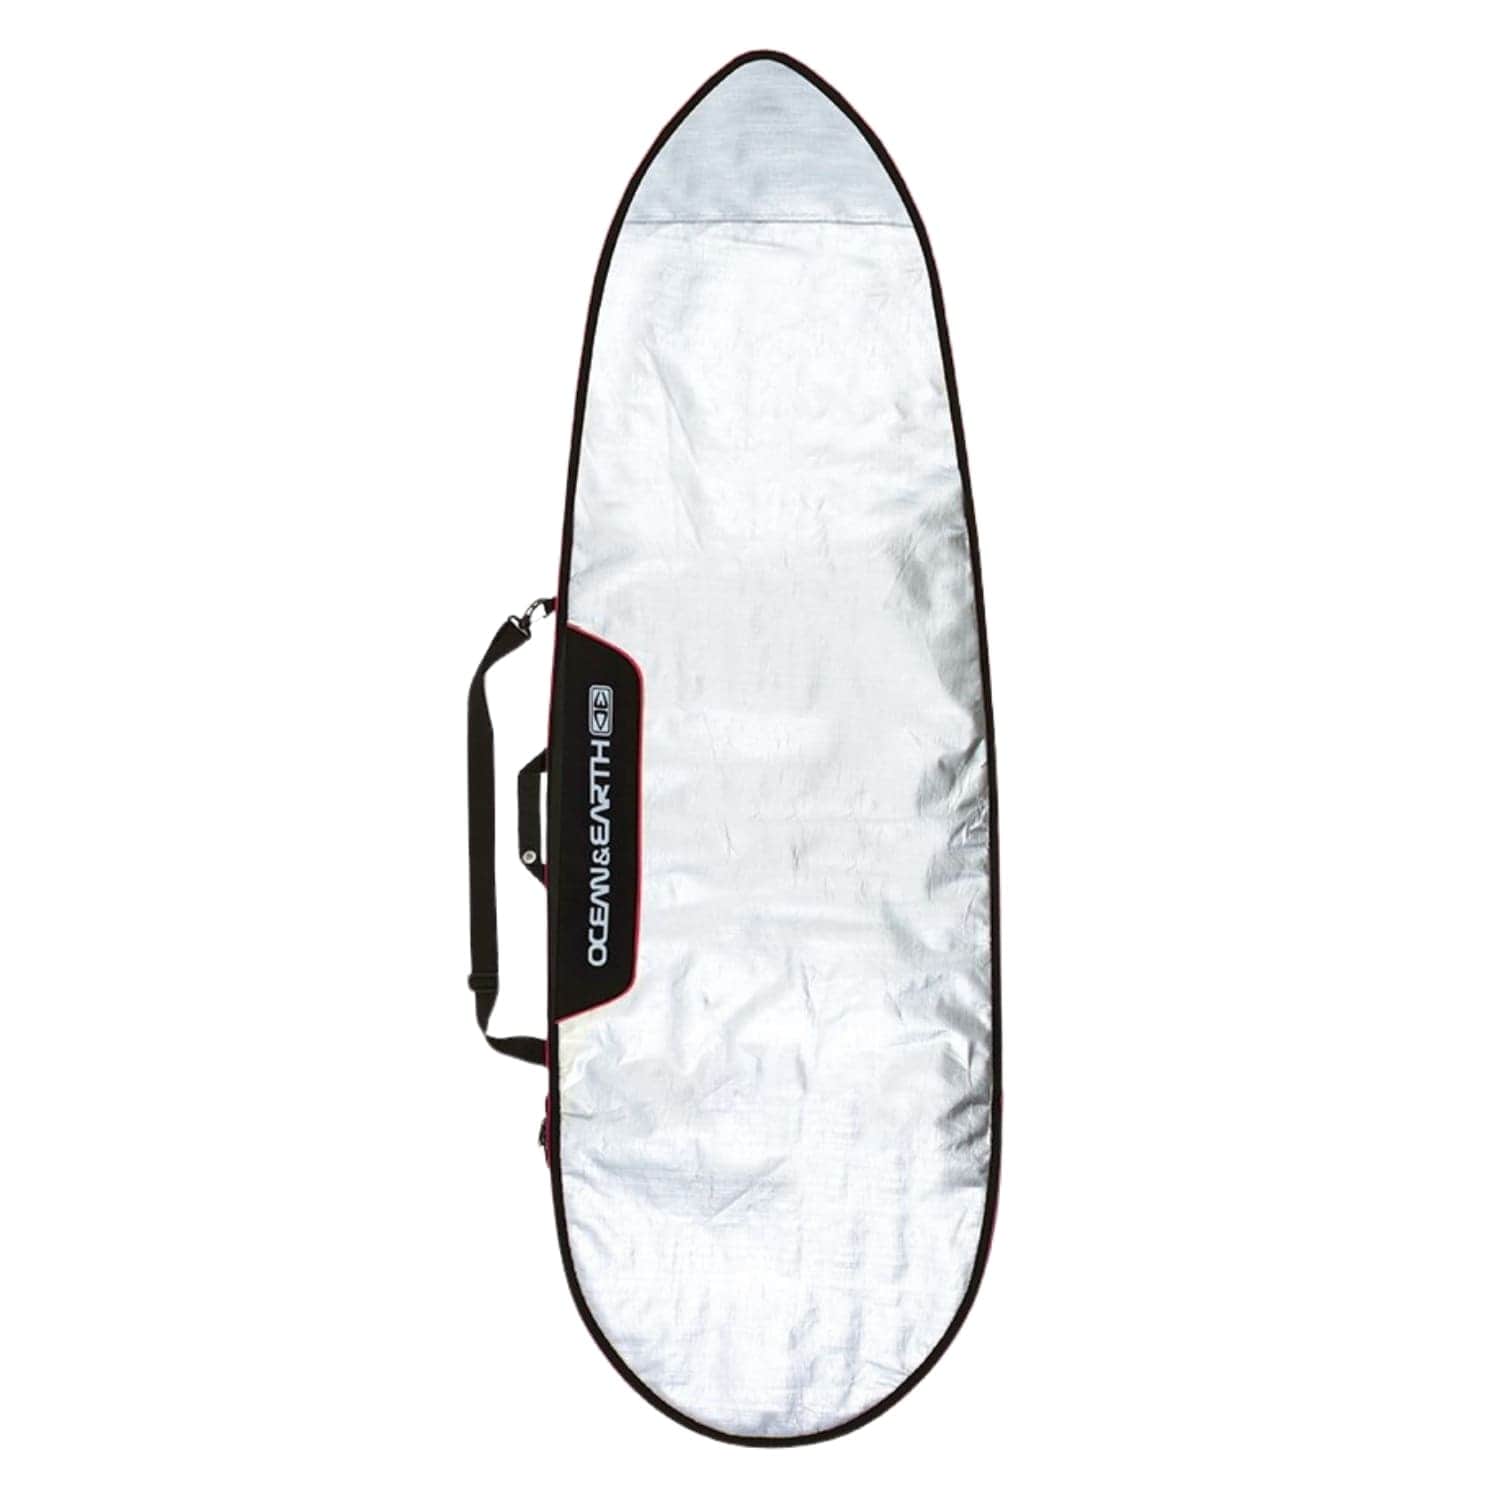 Ocean and Earth Barry Basic 6ft Fish Board Cover 2021 Silver Red - Surfboard Day Runner Bag/Cover by Ocean and Earth 6ft 0in